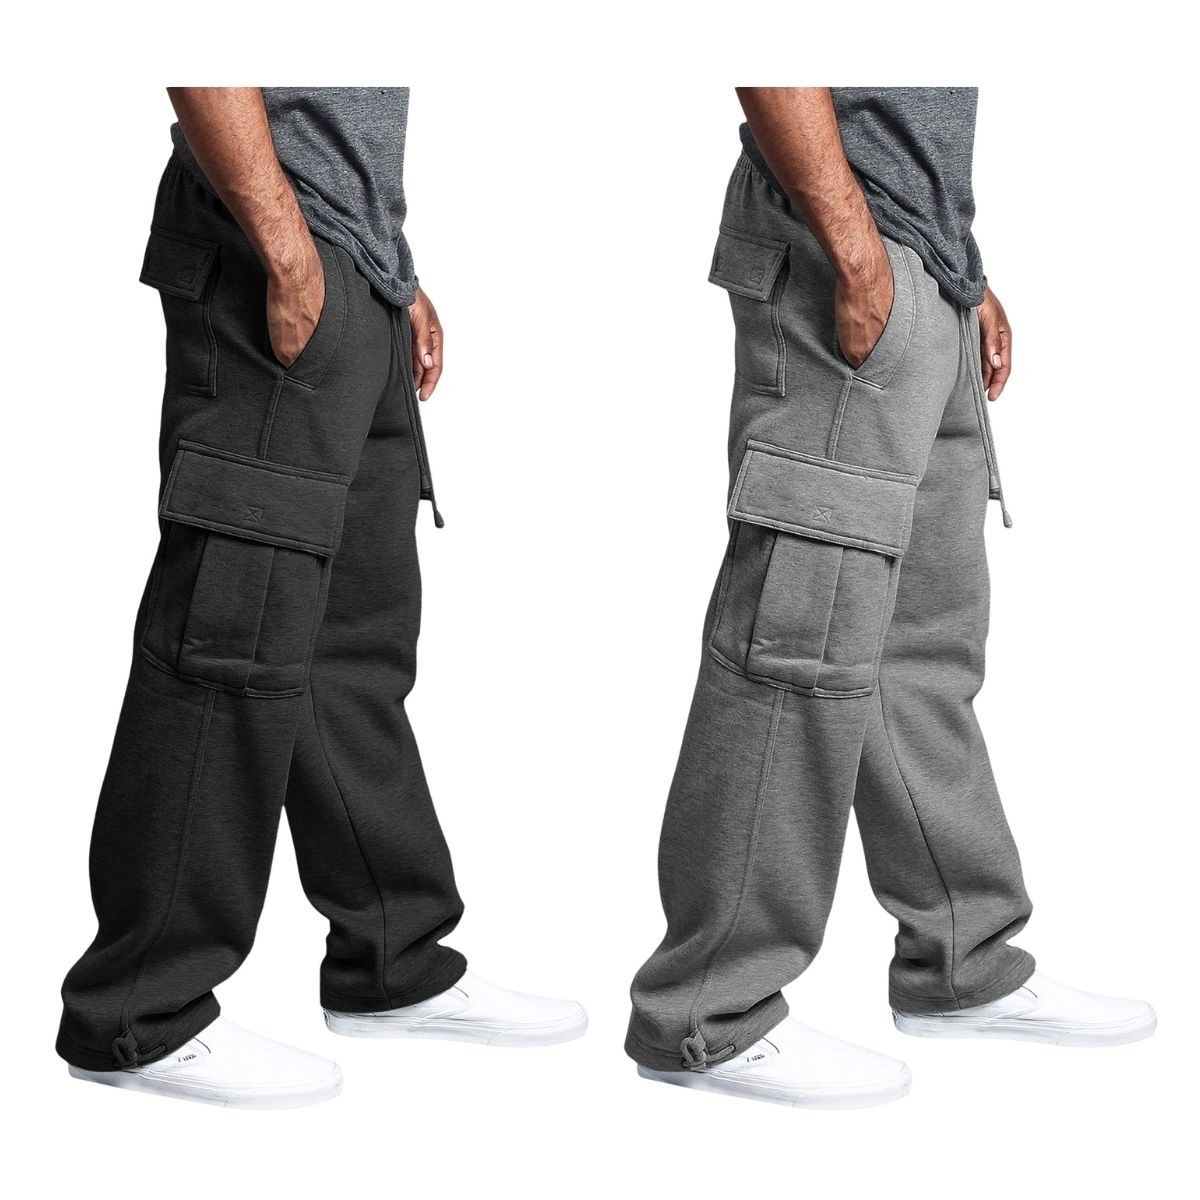 2-Pack: Men's Casual Solid Fleece Lined Cargo Jogger Soft Sweatpants With Pockets - Black&grey, Small